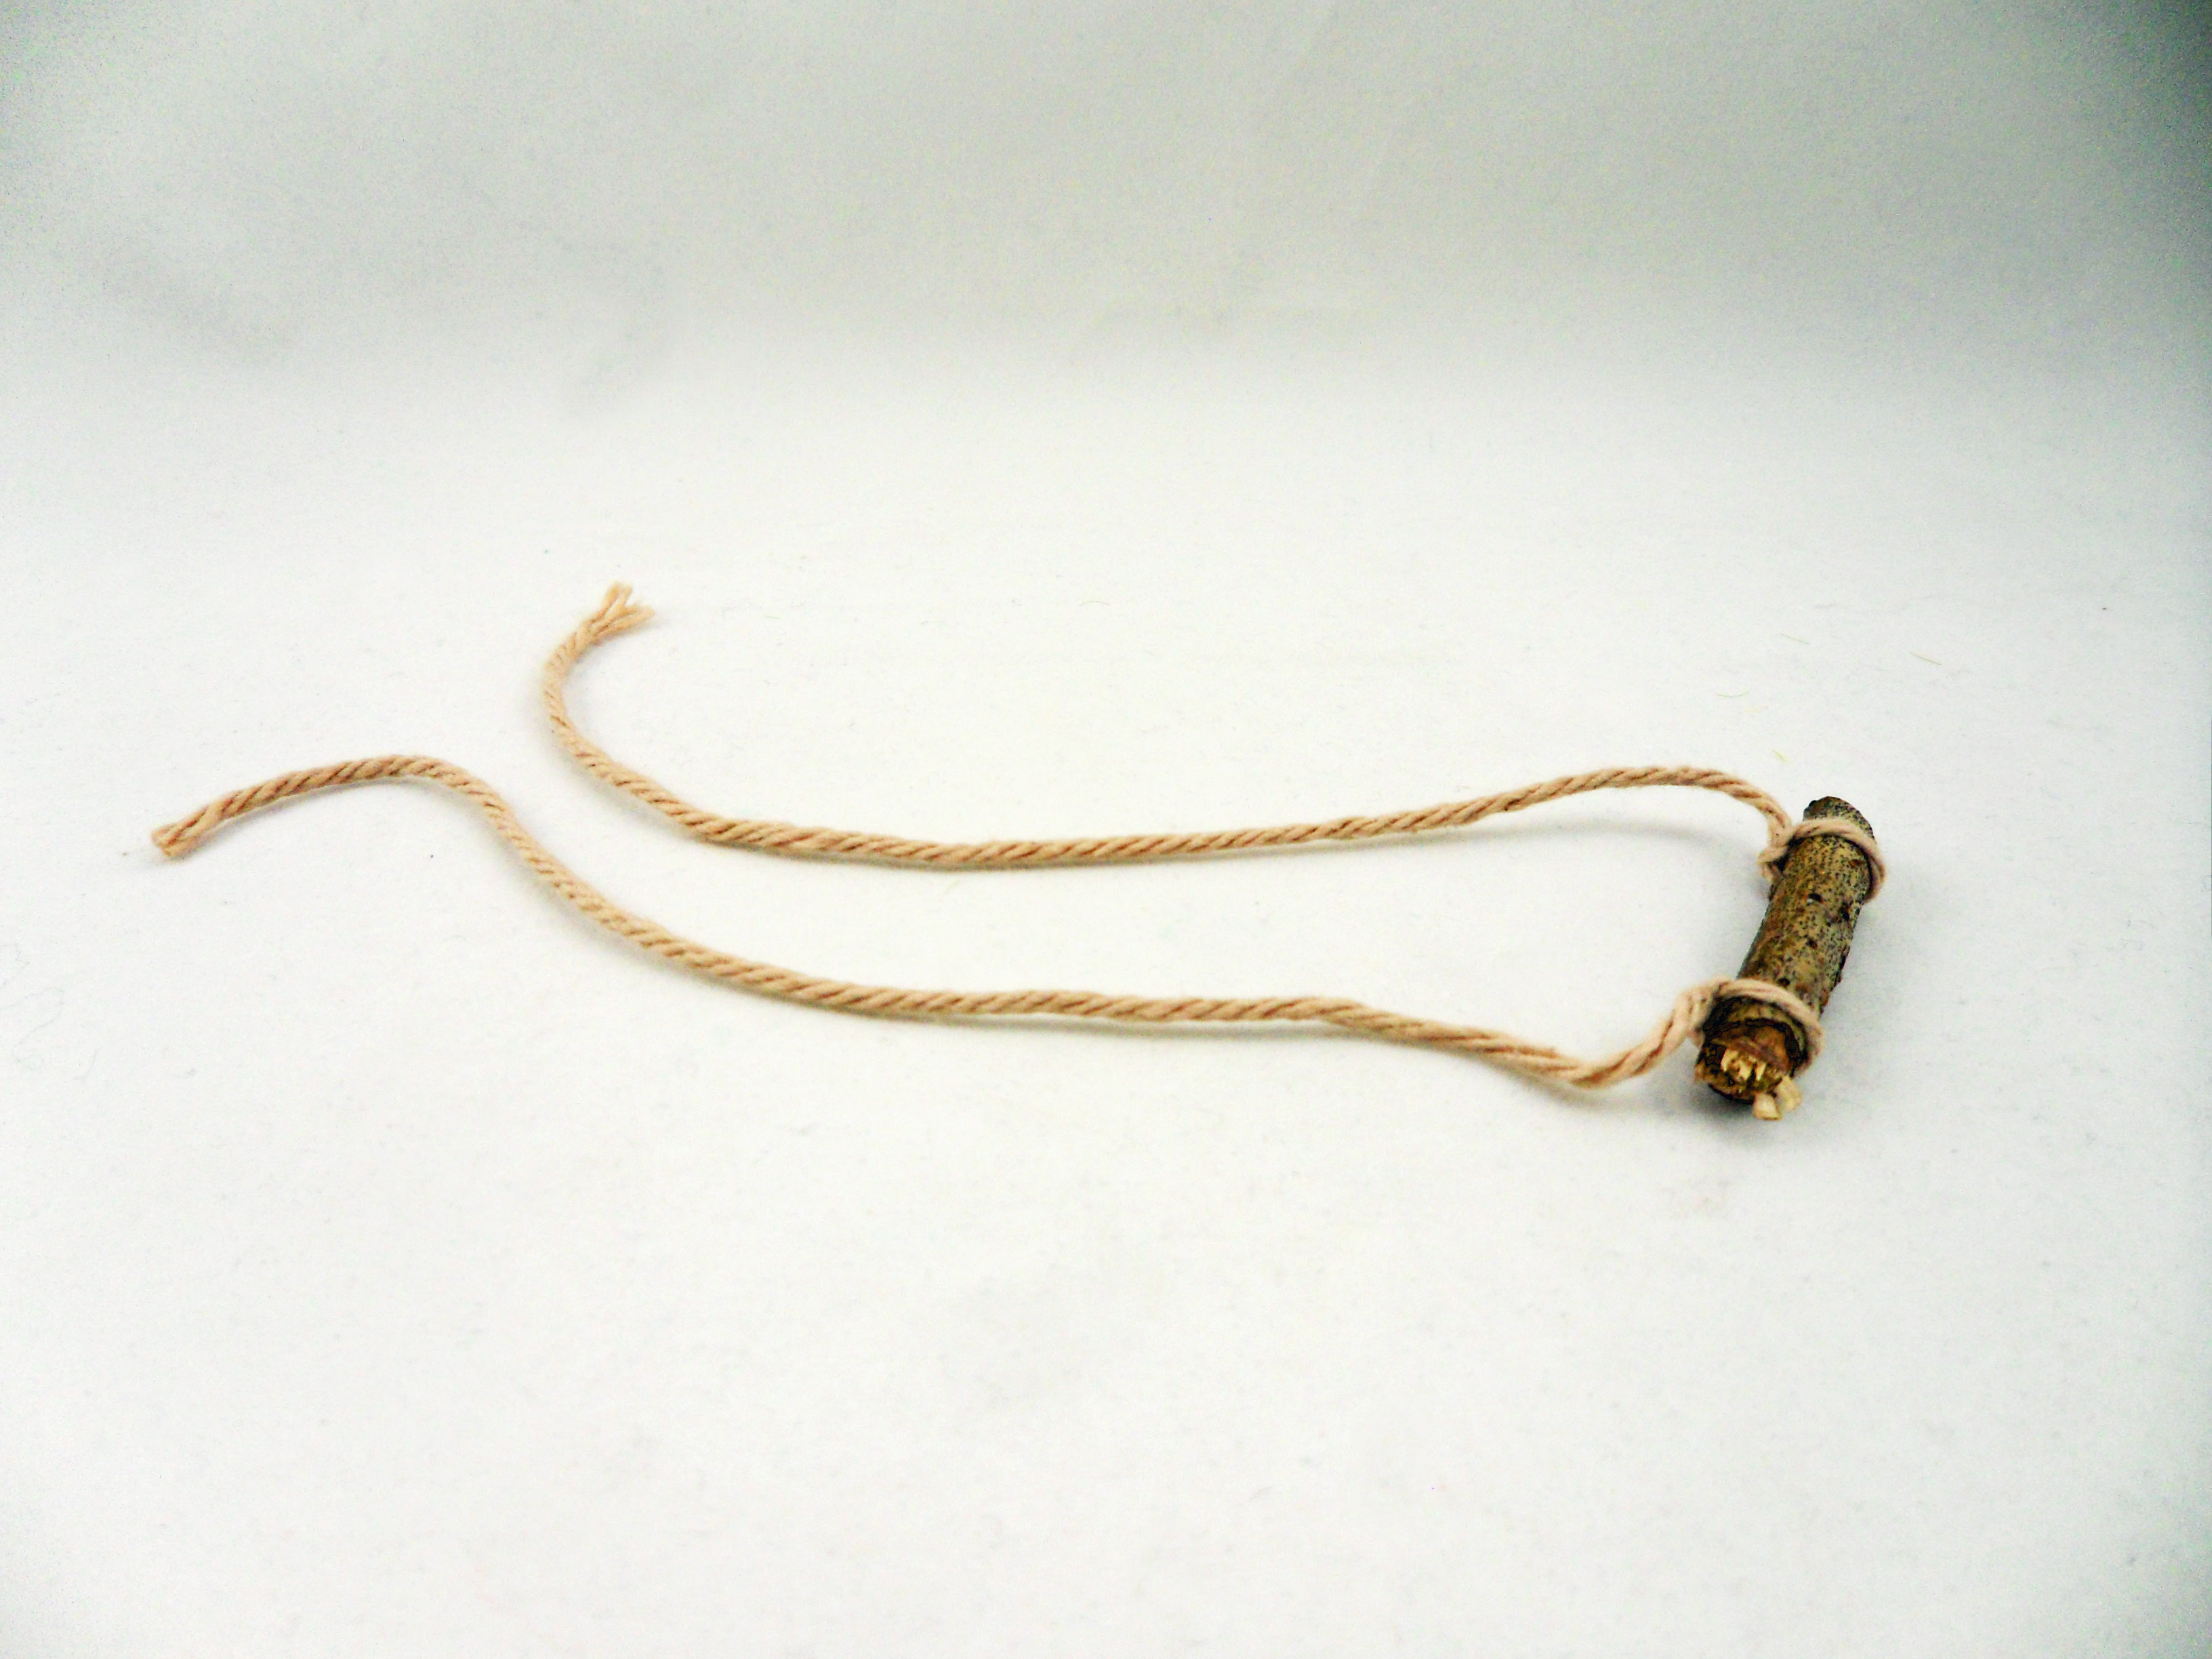 Step 5 is to create your perch by tying strands of string to a small piece of wood | OrnamentShop.com